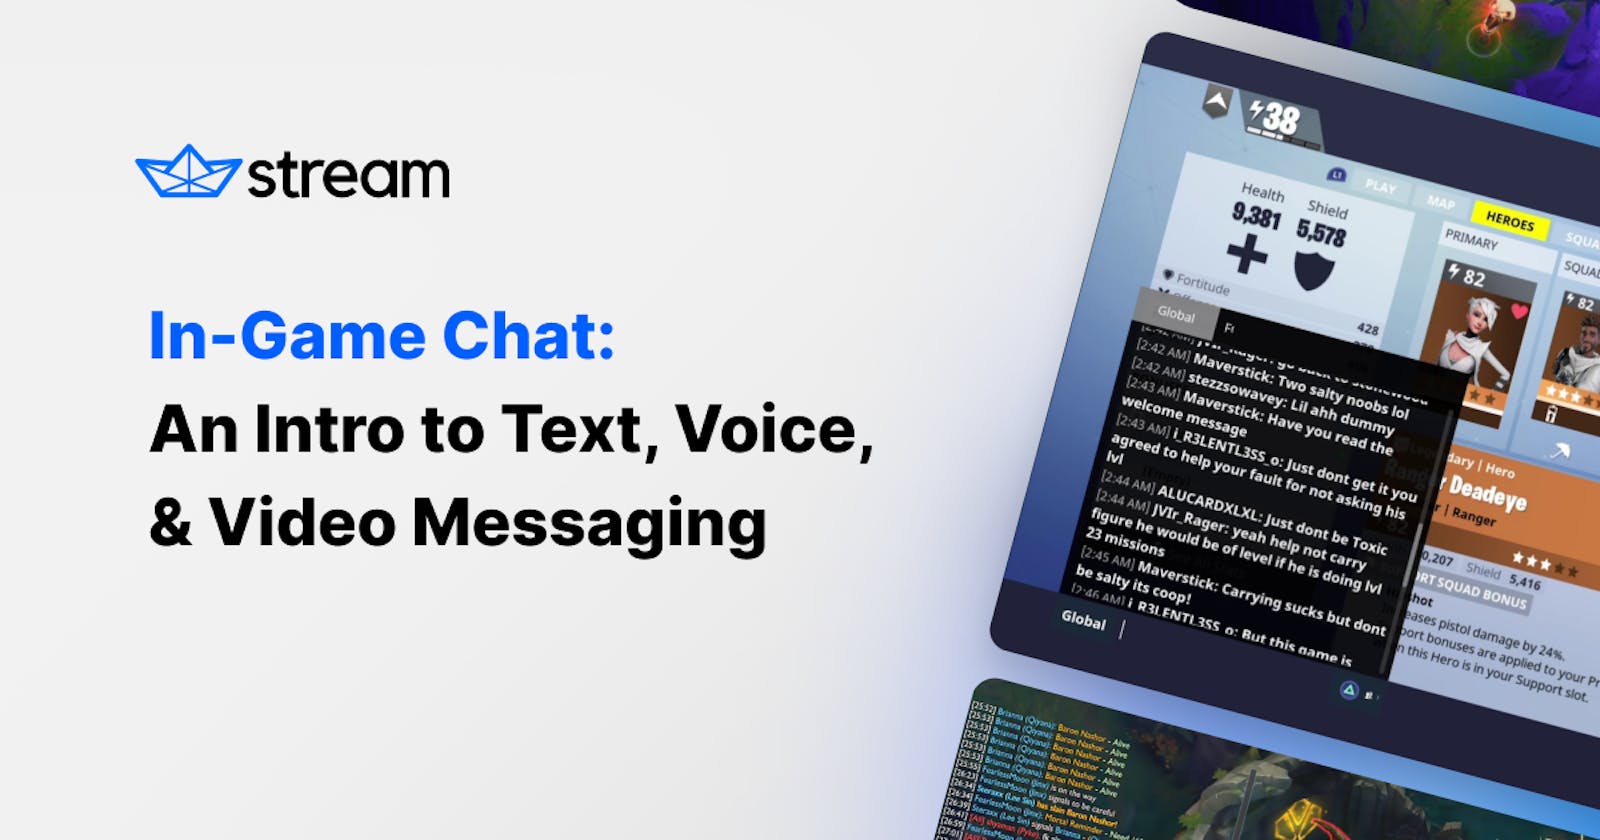 In-Game Chat: An Intro to Text, Voice, & Video Messaging